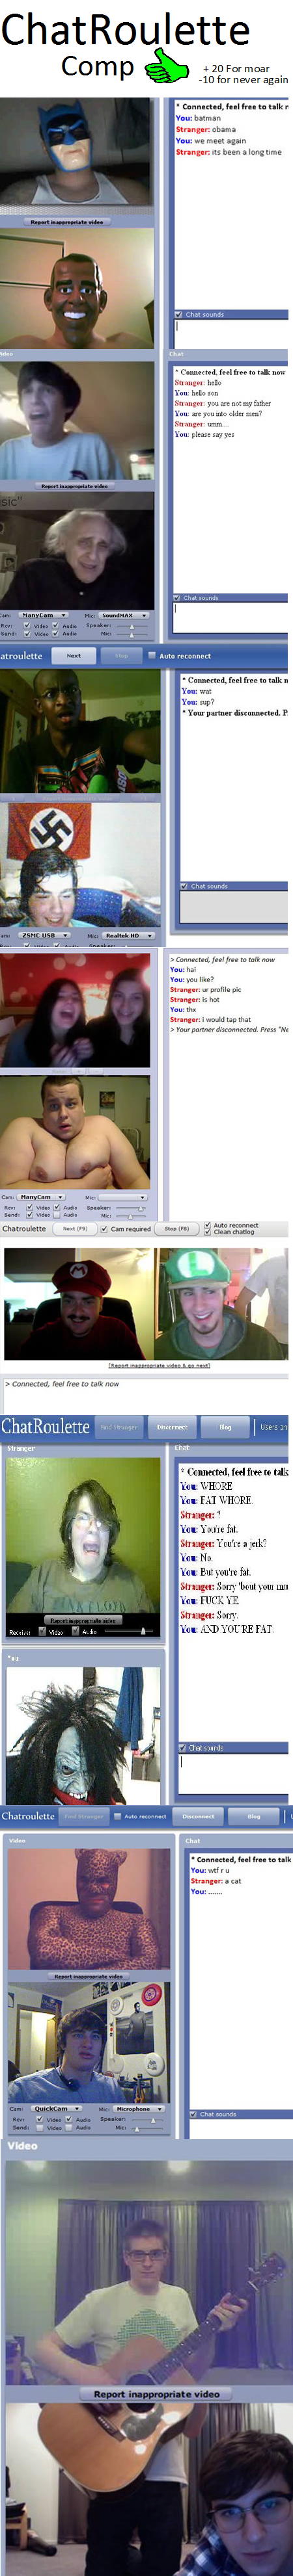 Just some of my favorite Chatroulette moments.